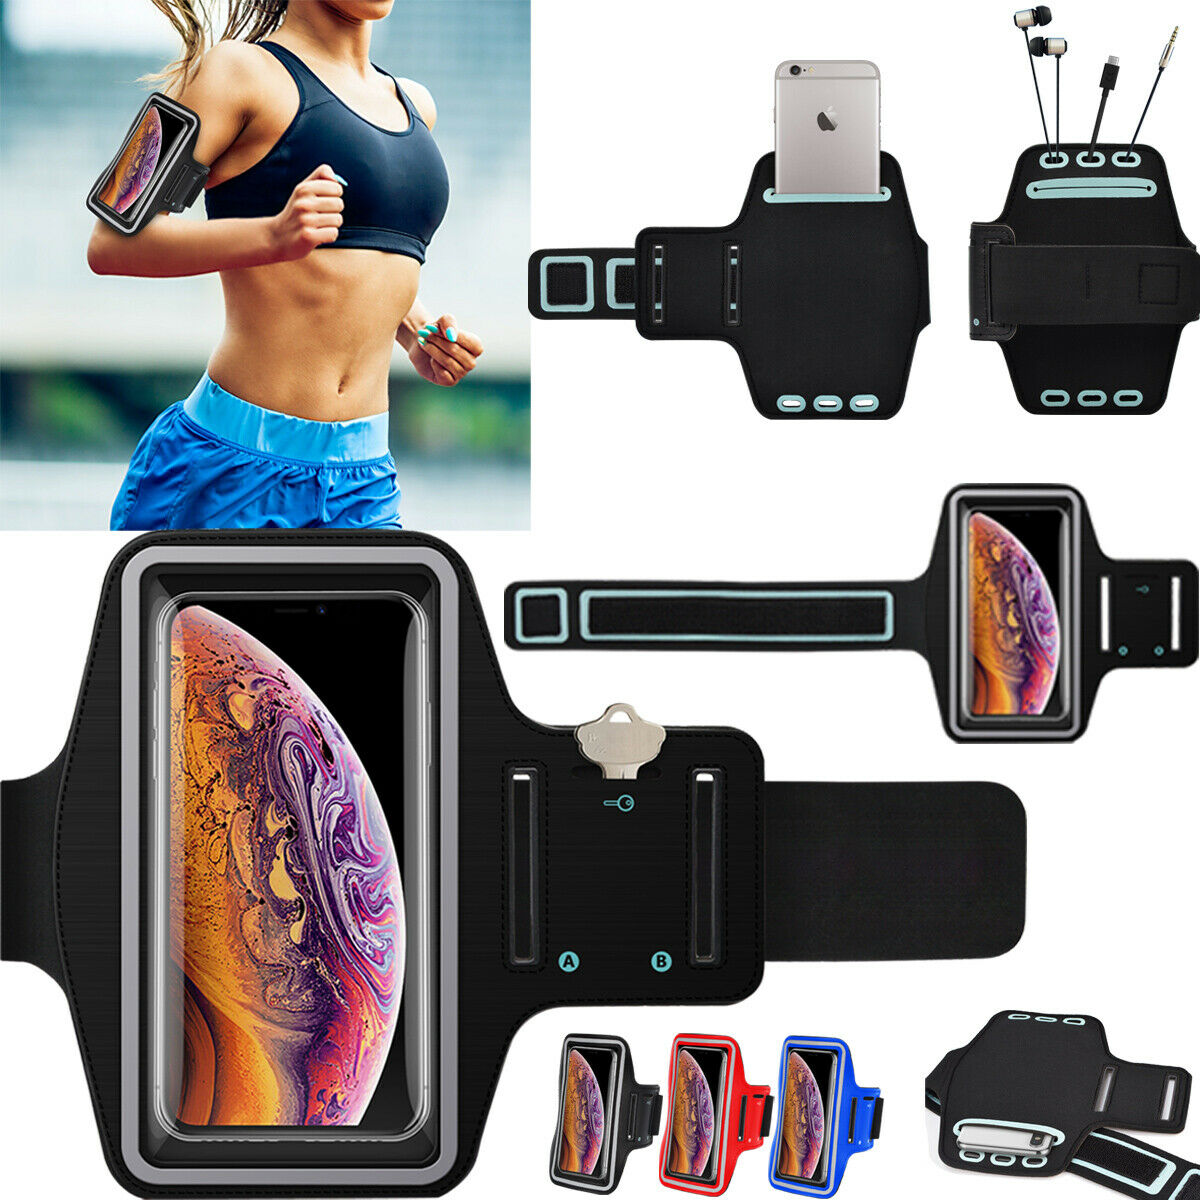 Armband Case Sports Gym Running Arm Band Phone For Iphone Xs Max Xr / 6 7 8 Plus